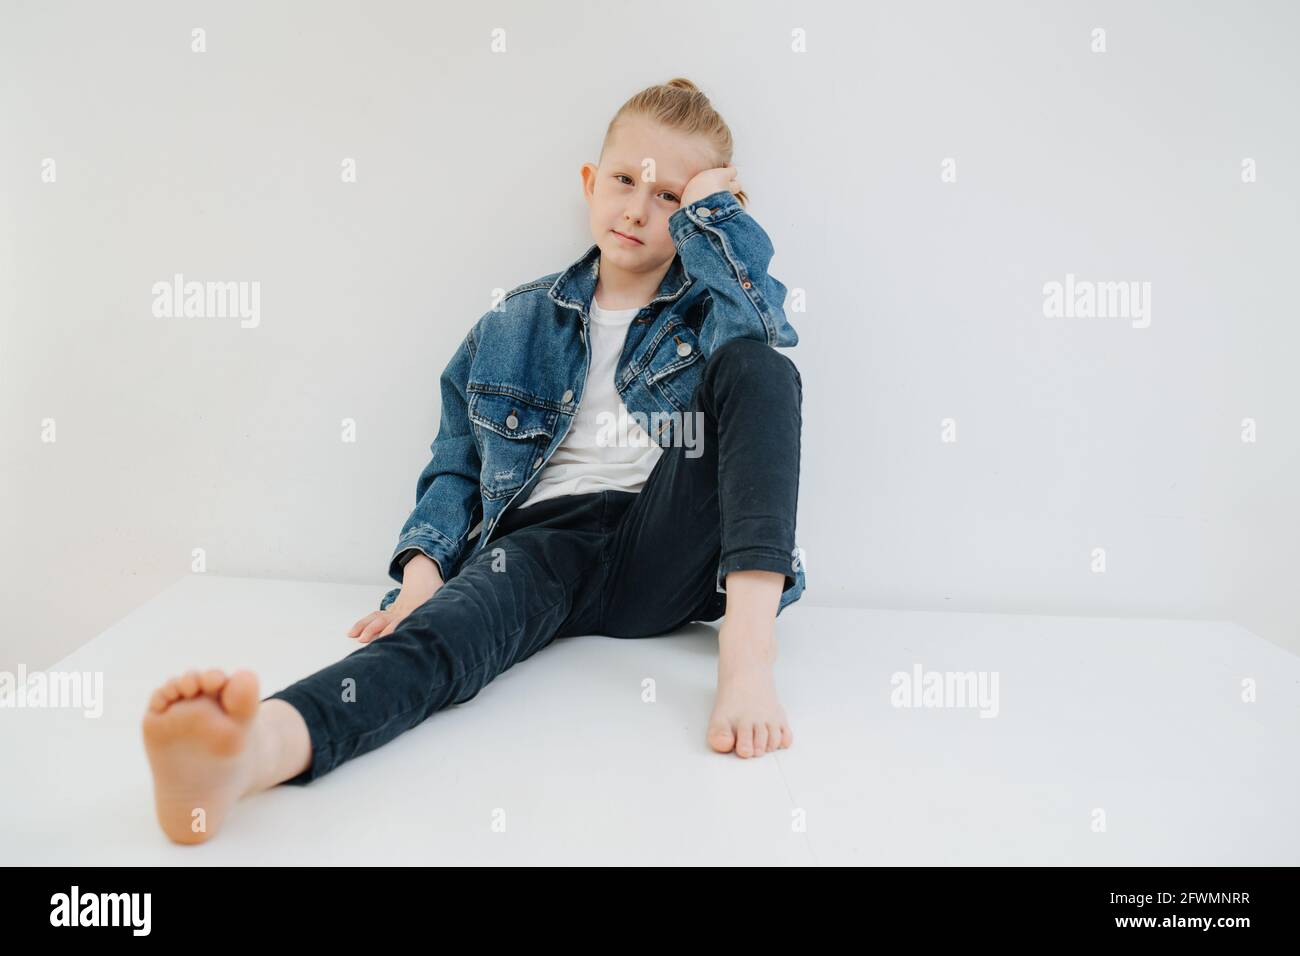 Portrait of a nine year old boy in a jeans suit. Sitting on a table. Over white. Stock Photo